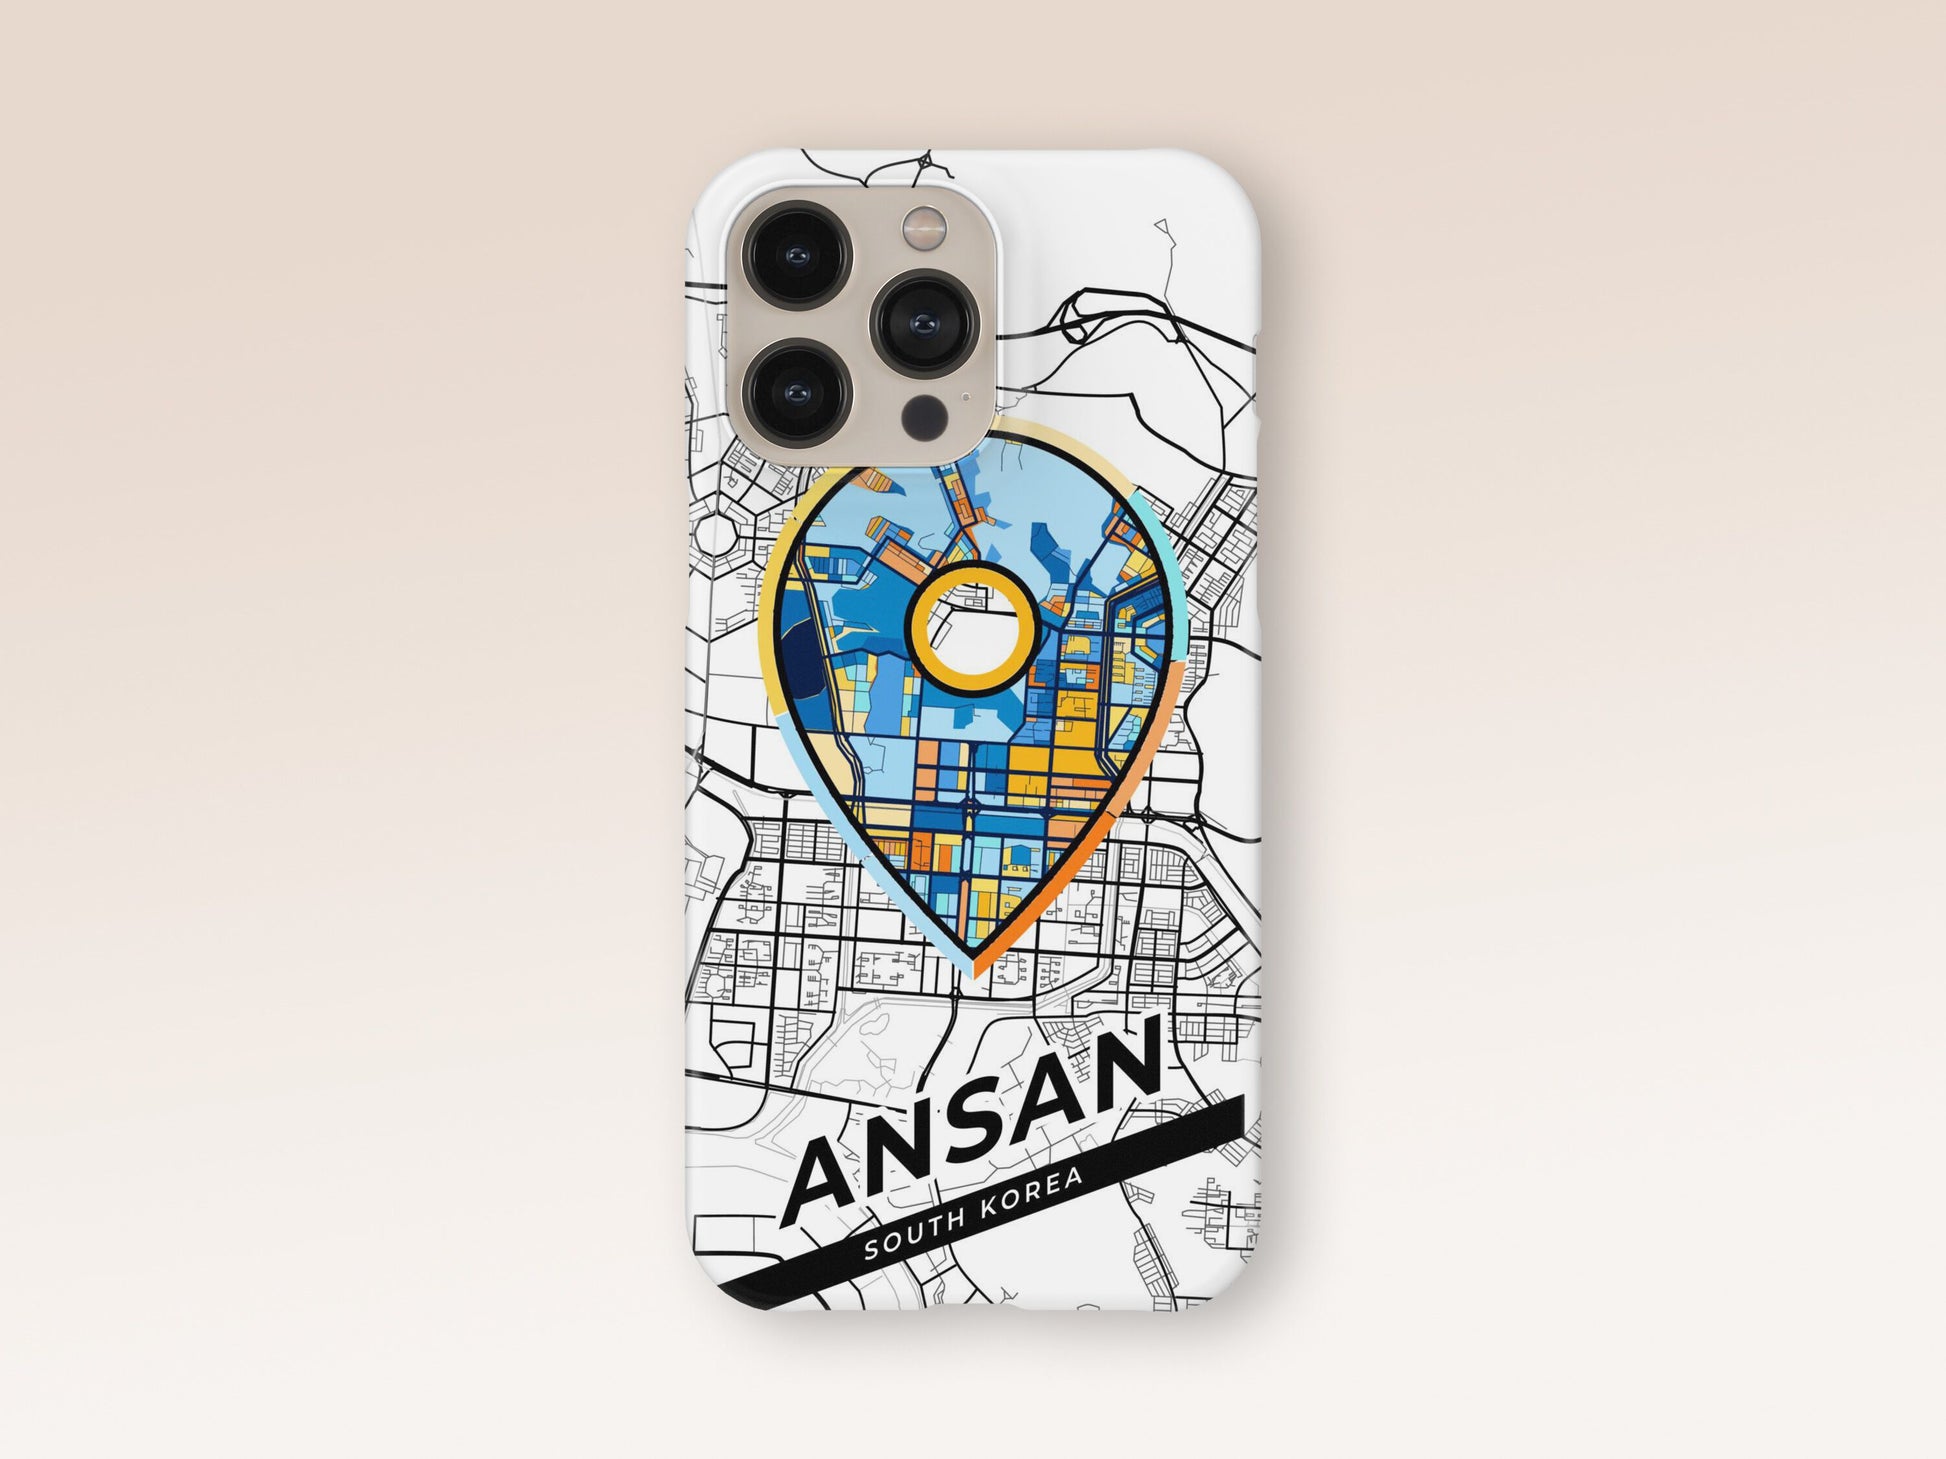 Ansan South Korea slim phone case with colorful icon. Birthday, wedding or housewarming gift. Couple match cases. 1